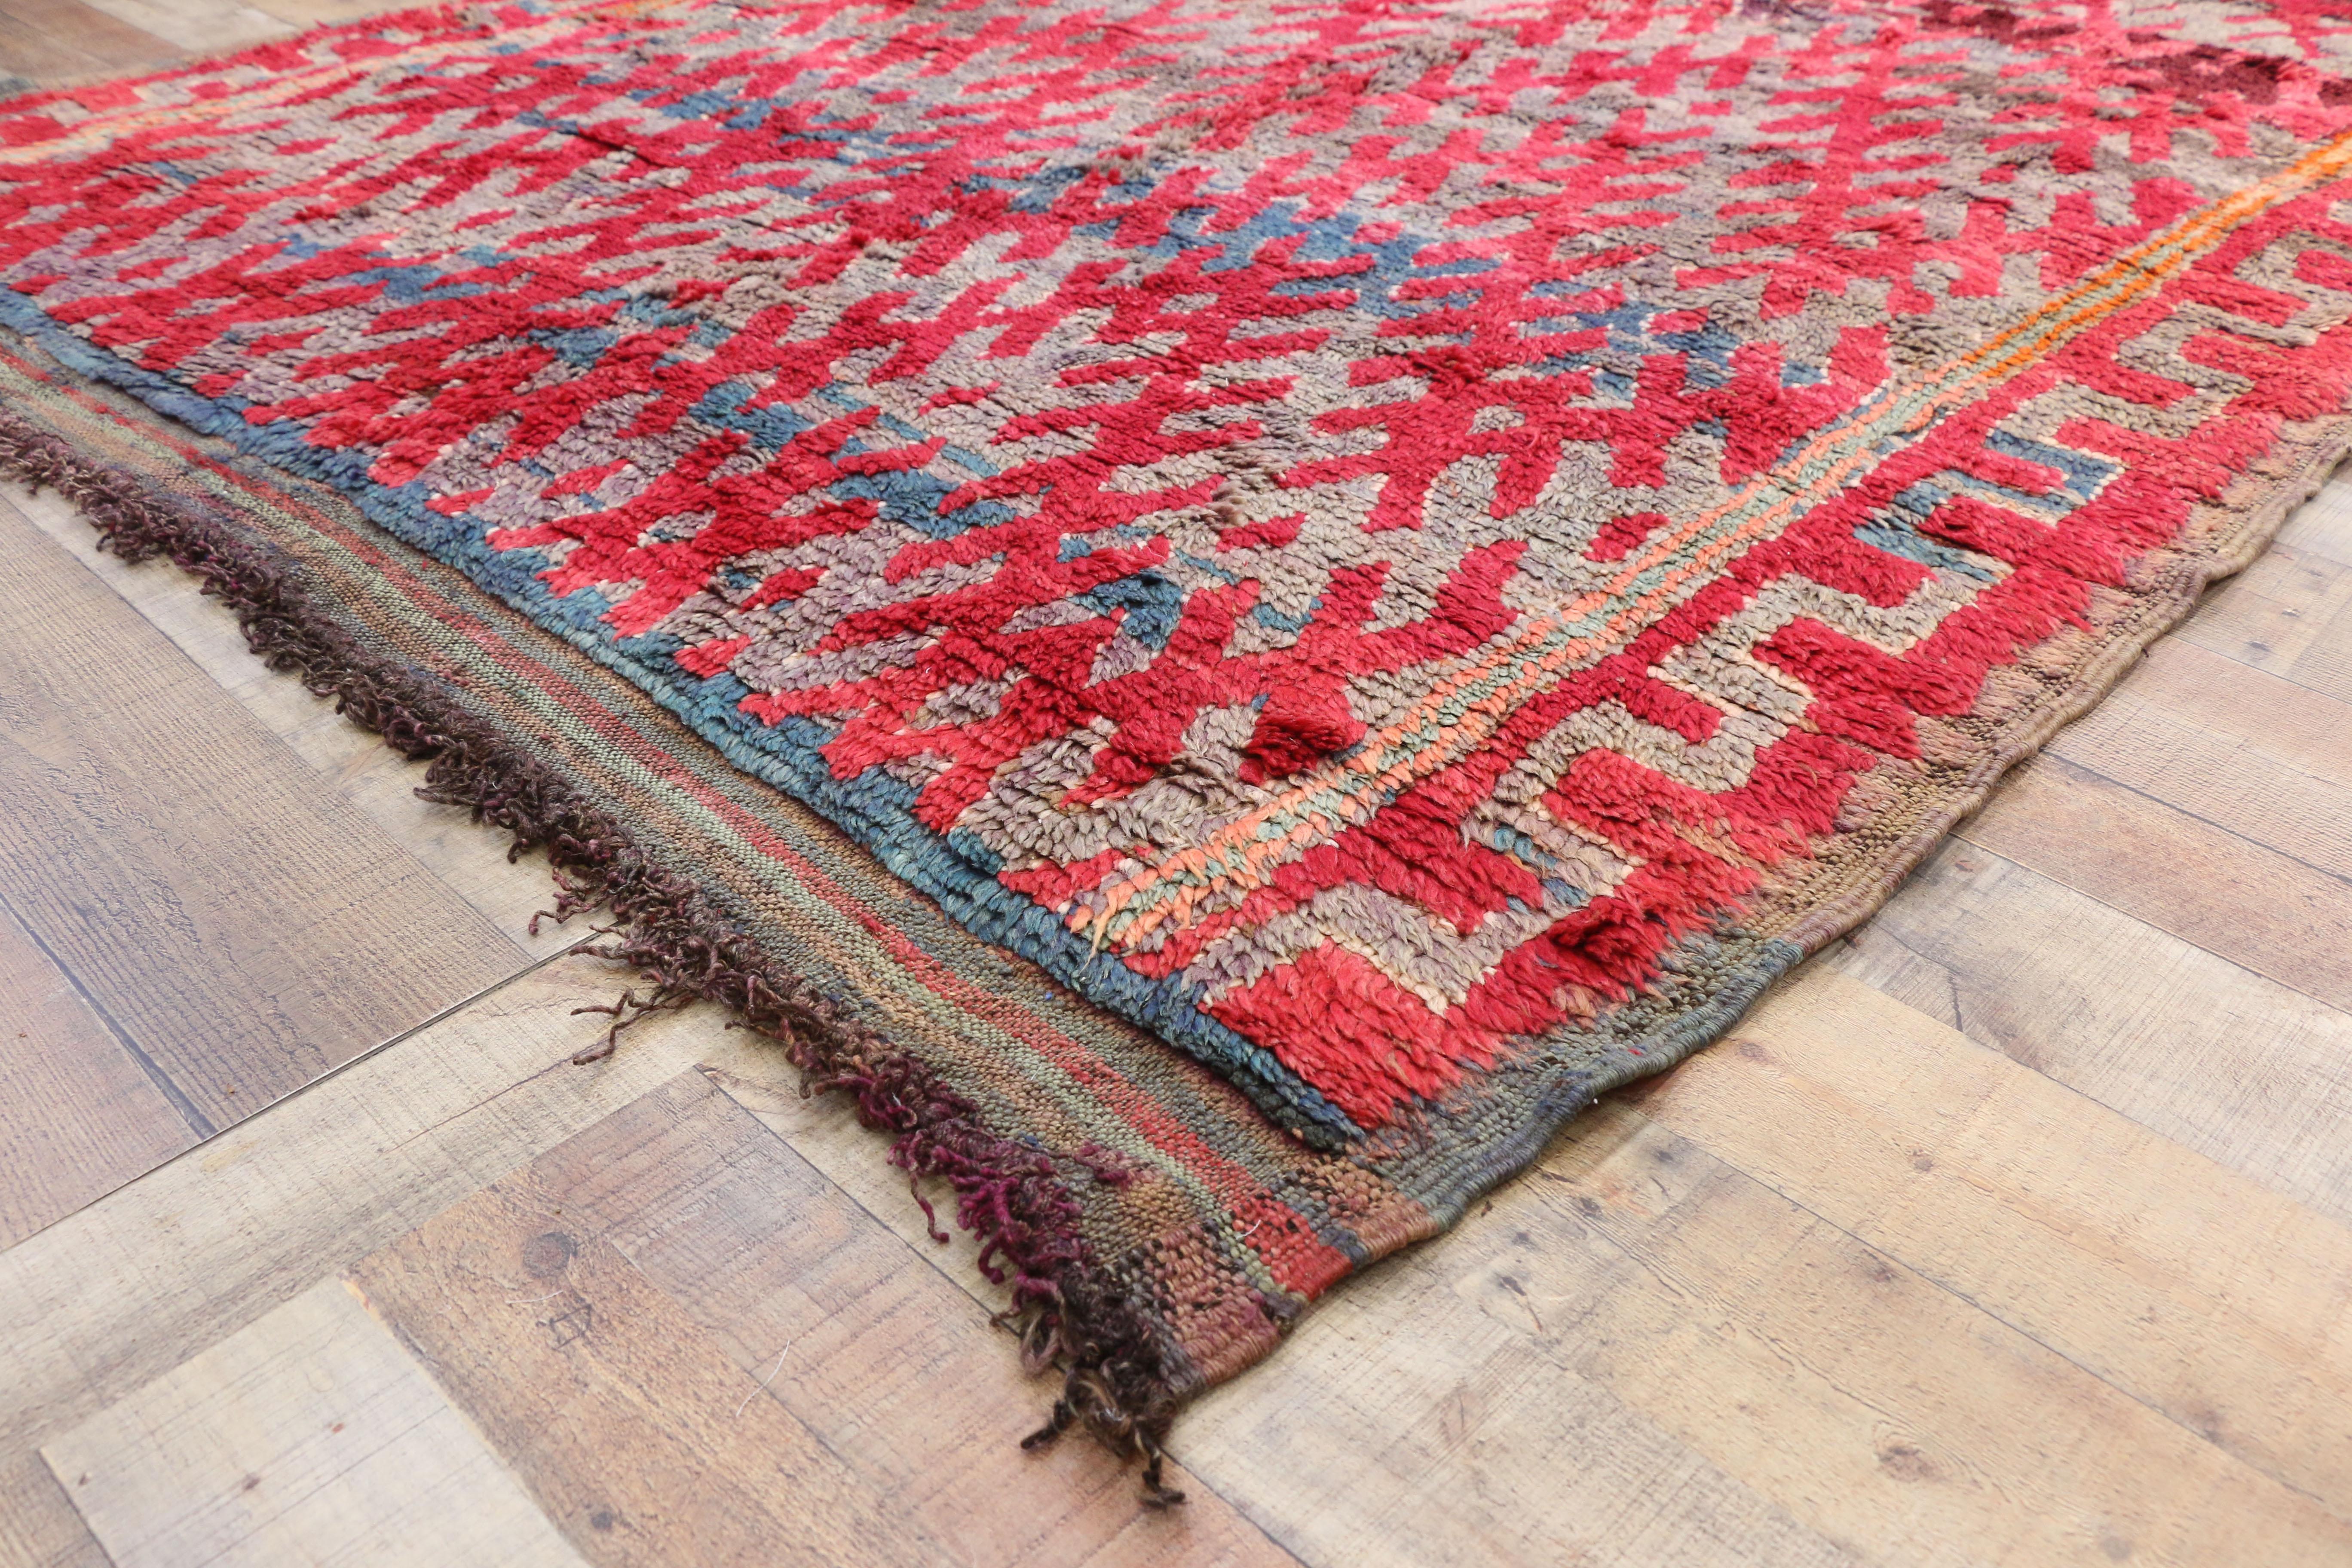 20th Century Vintage Moroccan Rug, Berber Moroccan Rug with Vibrant Mid-Century Modern Style